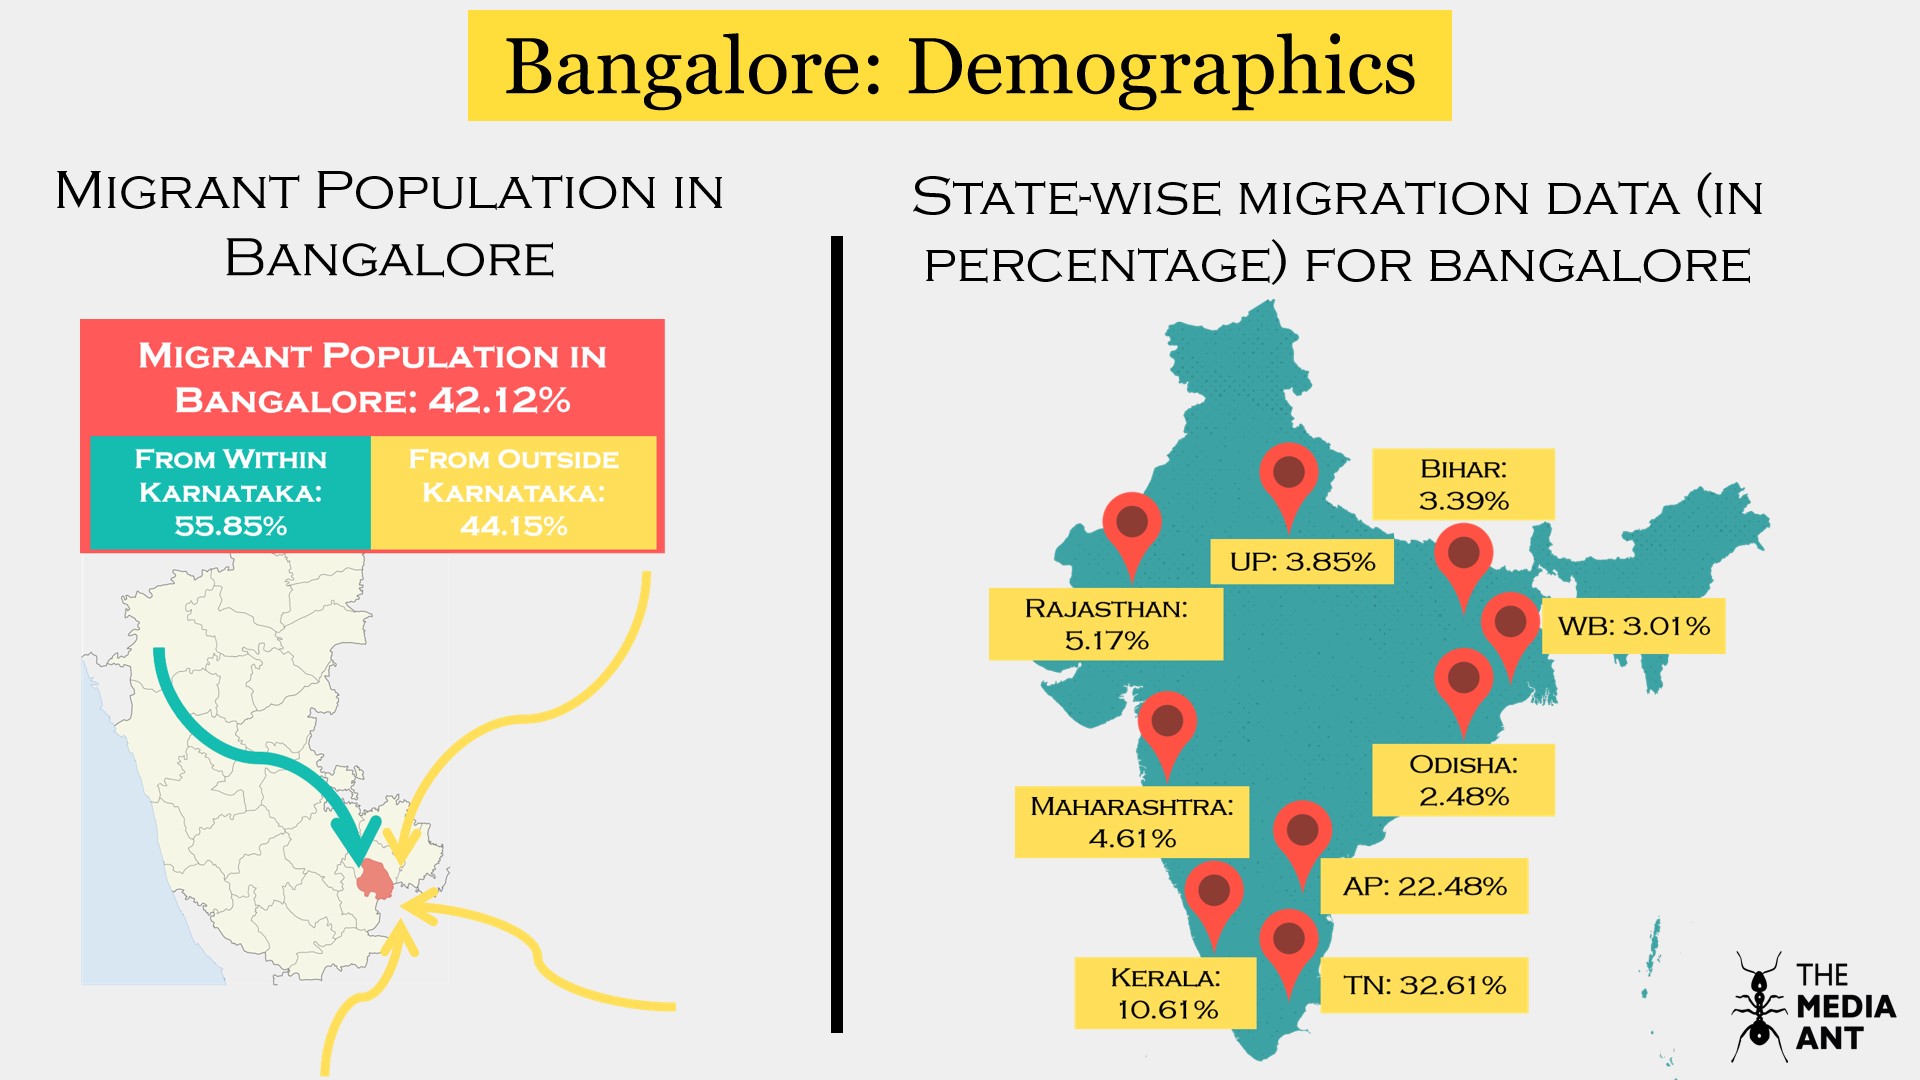 How many people in Bangalore are migrants?